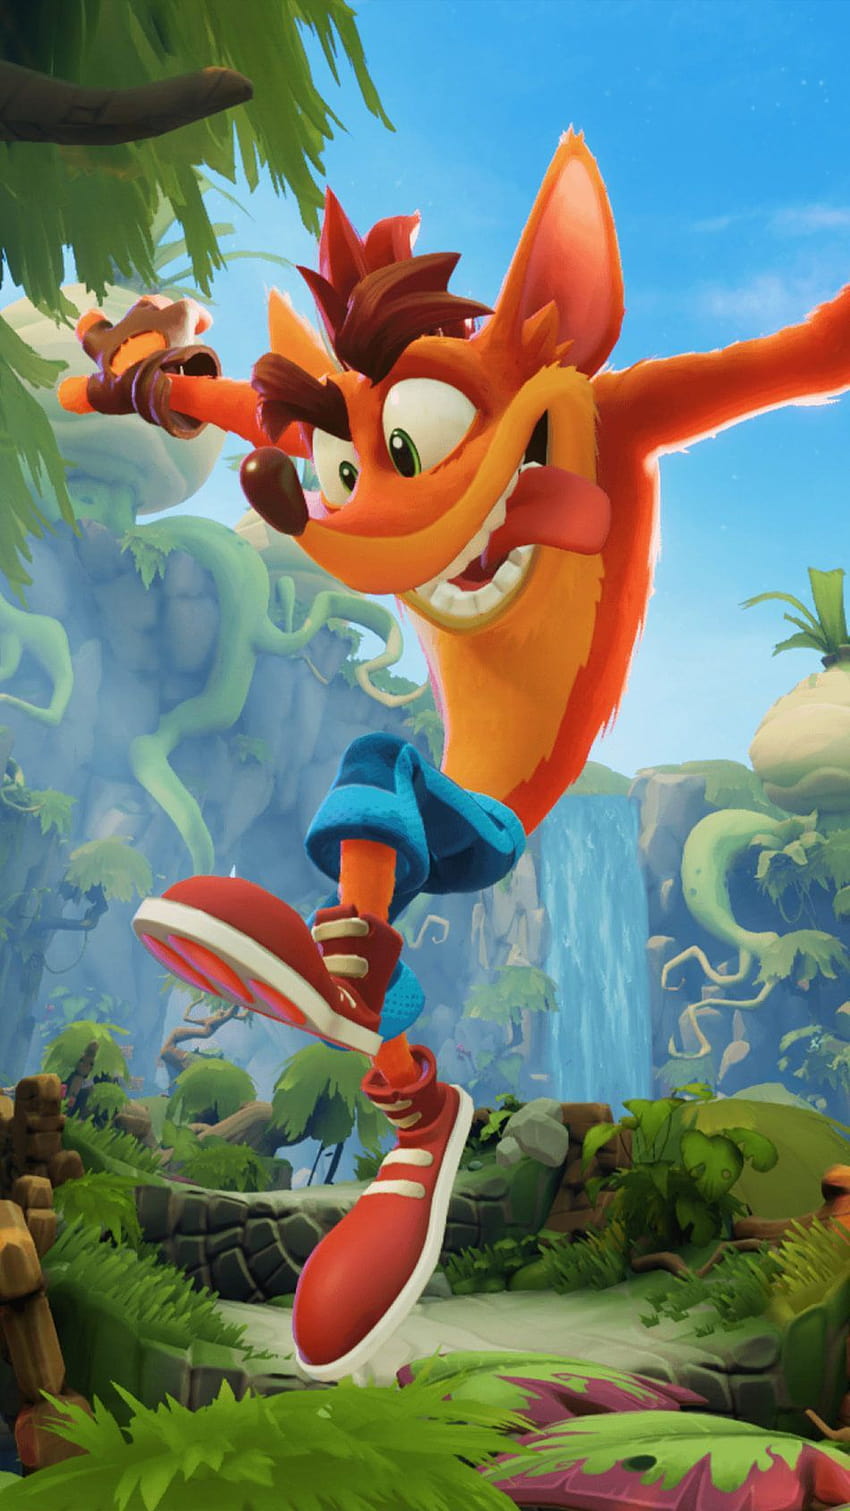 Crash Bandicoot 4 It's About Time Ultra Mobile in 2020, crash bandicoot 4 its about time HD phone wallpaper